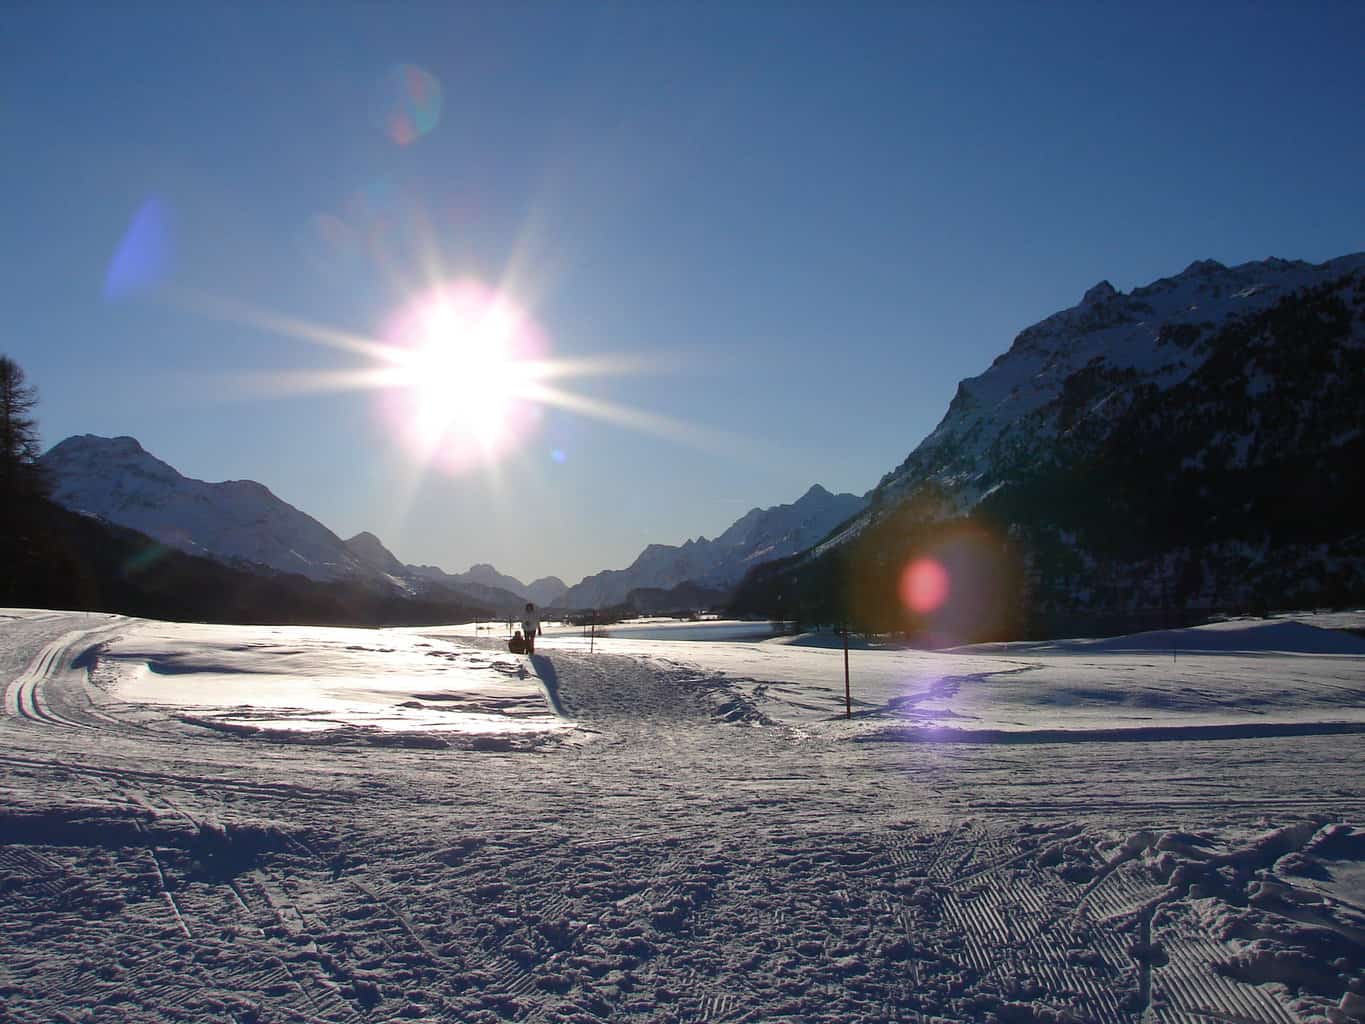 Winter Photography Tips - Avoid Lens Flare by Using a Lens Hood